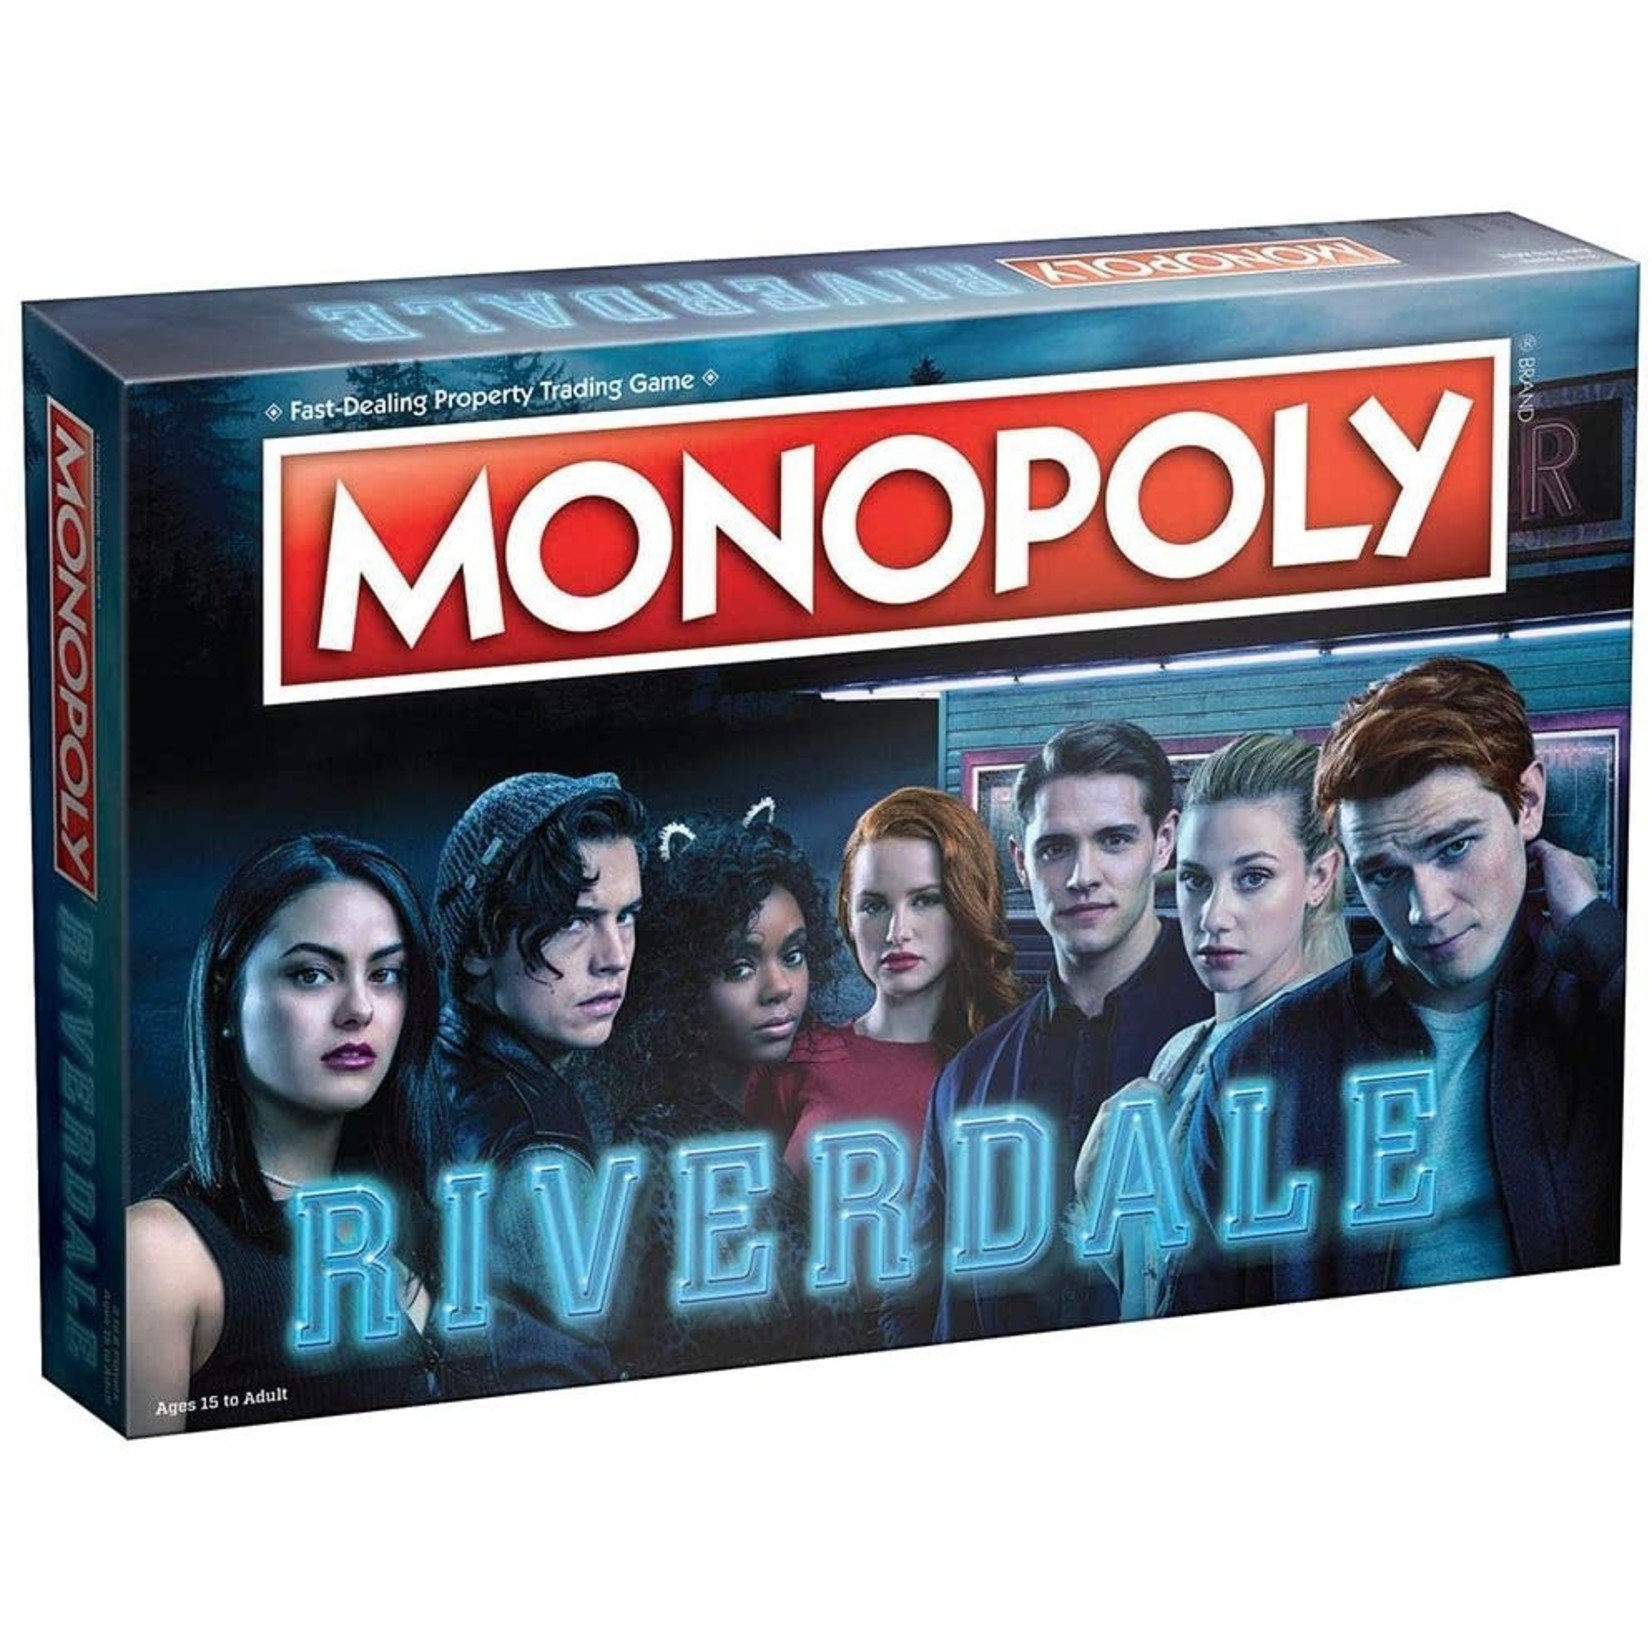 The OP Games Monopoly - Riverdale